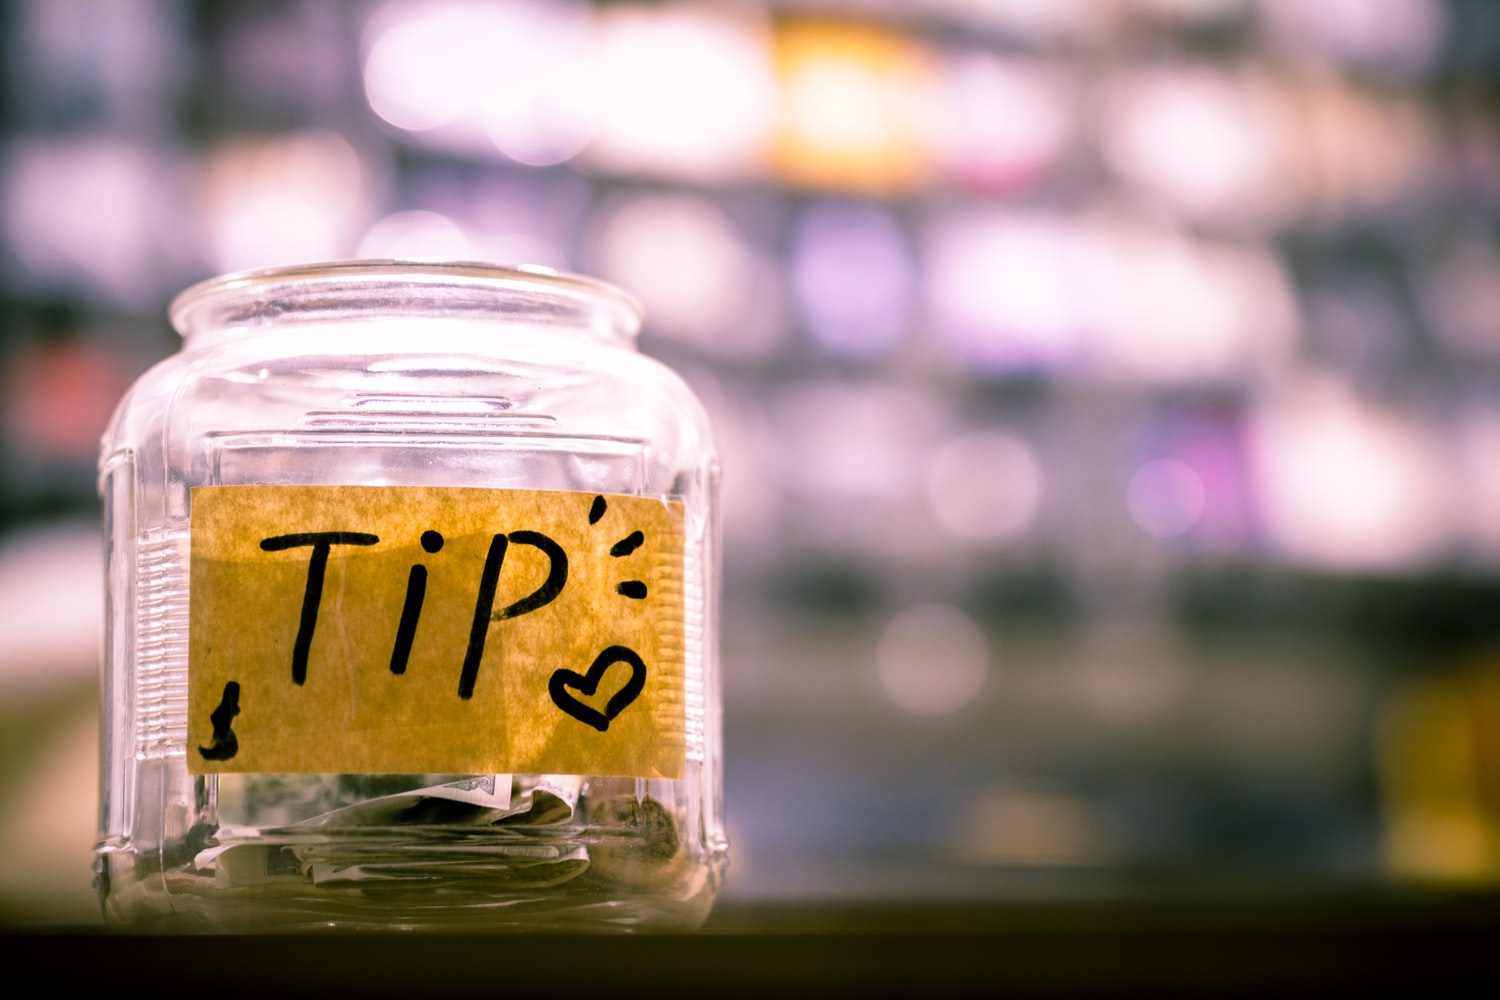 Consider leaving a tip.